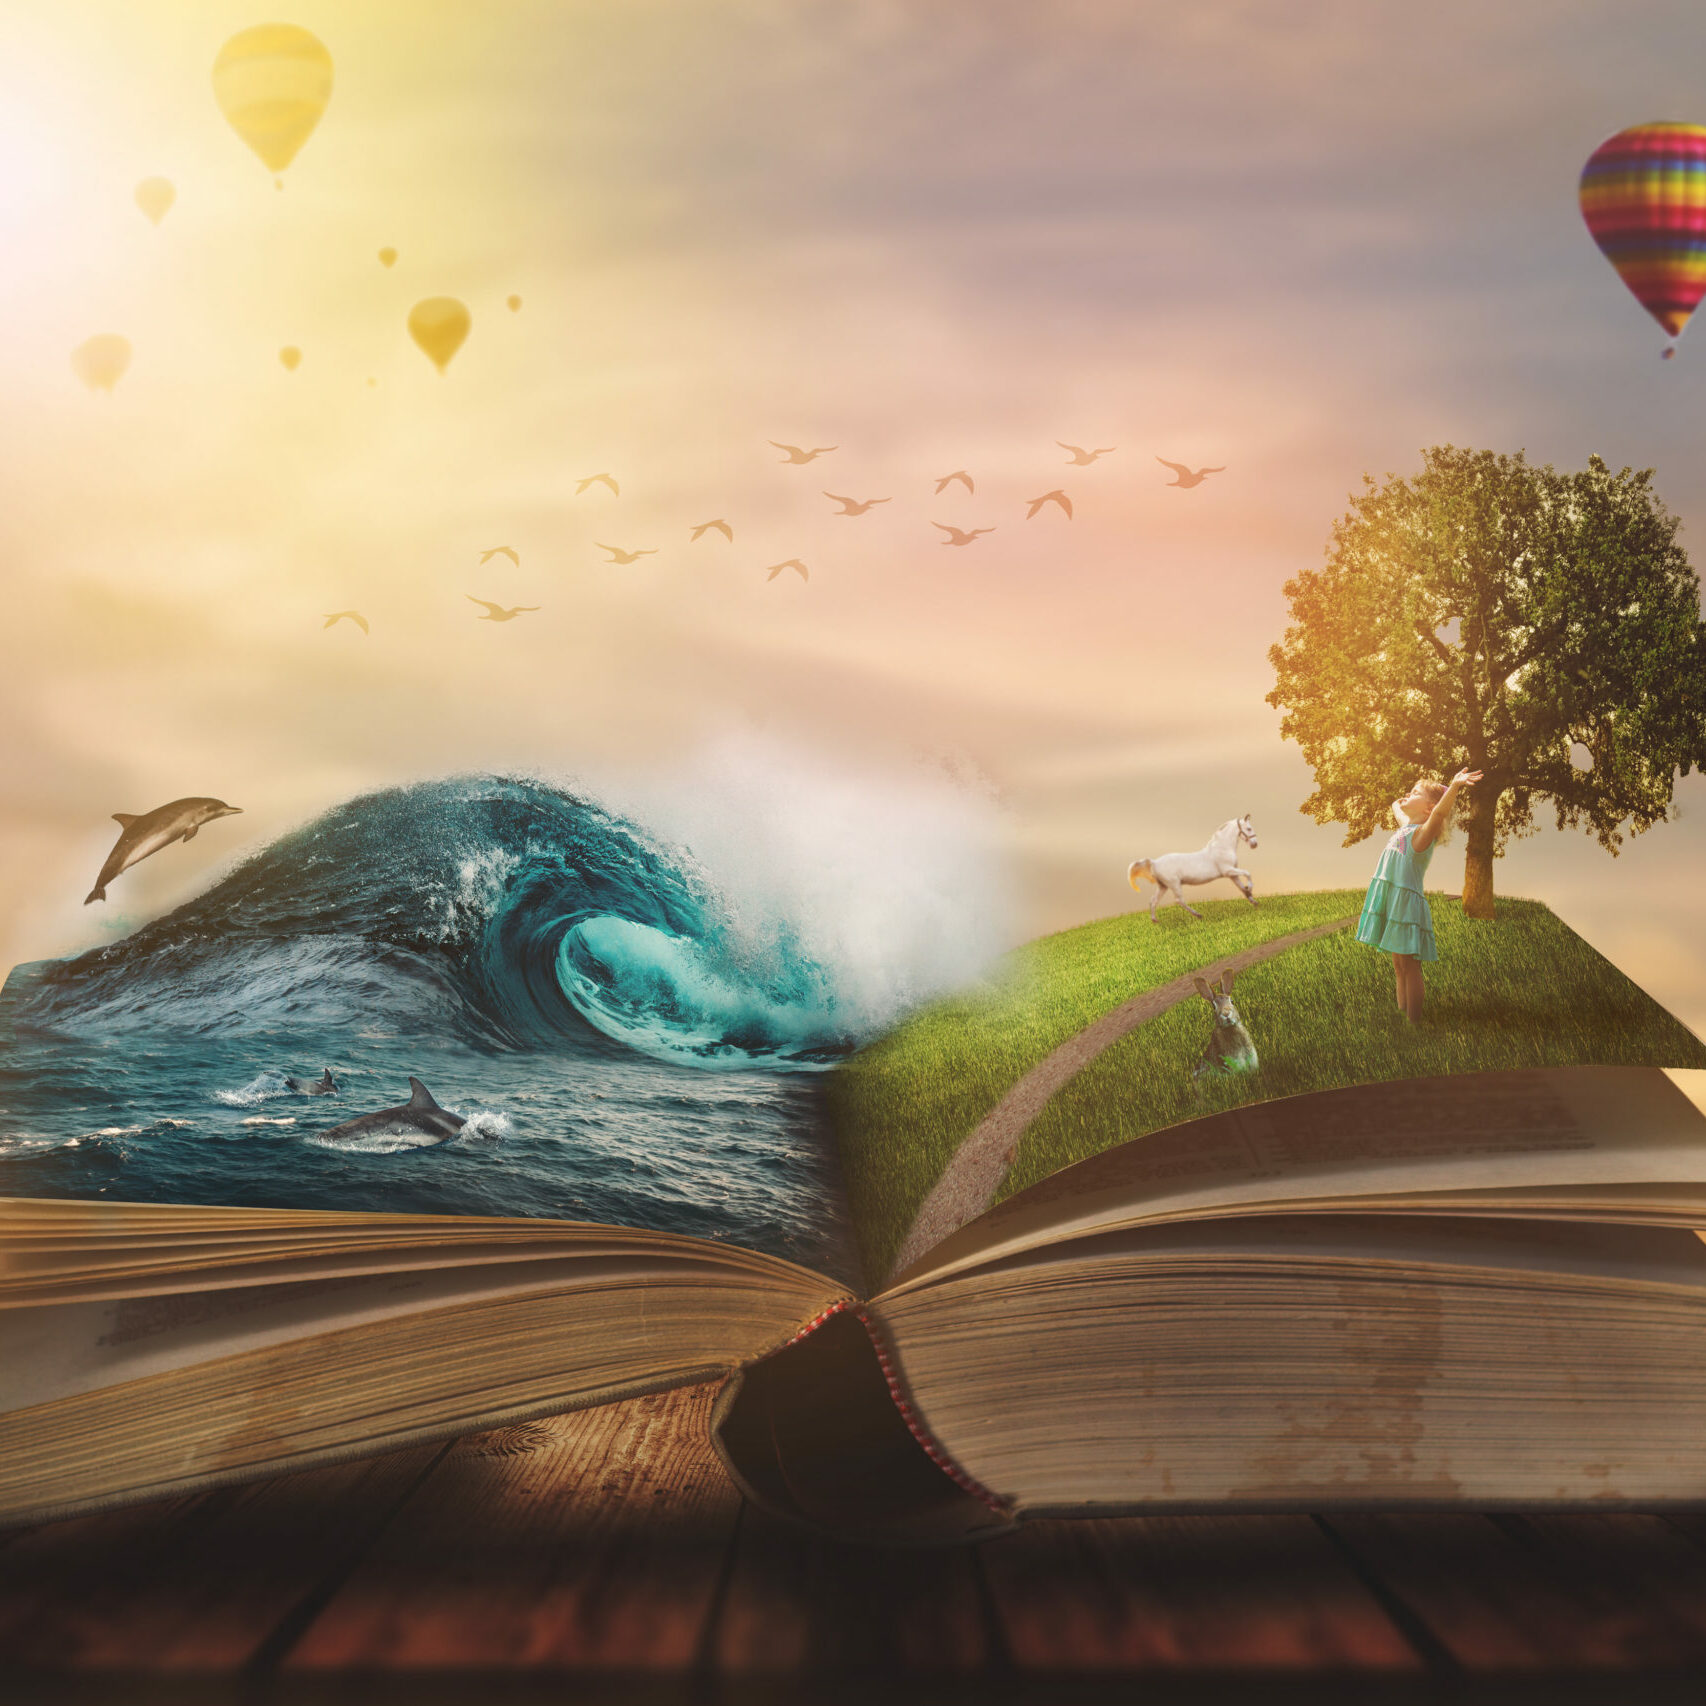 Concept of an open magic book; open pages with water and land and small child. Fantasy, nature or learning concept, with copy space